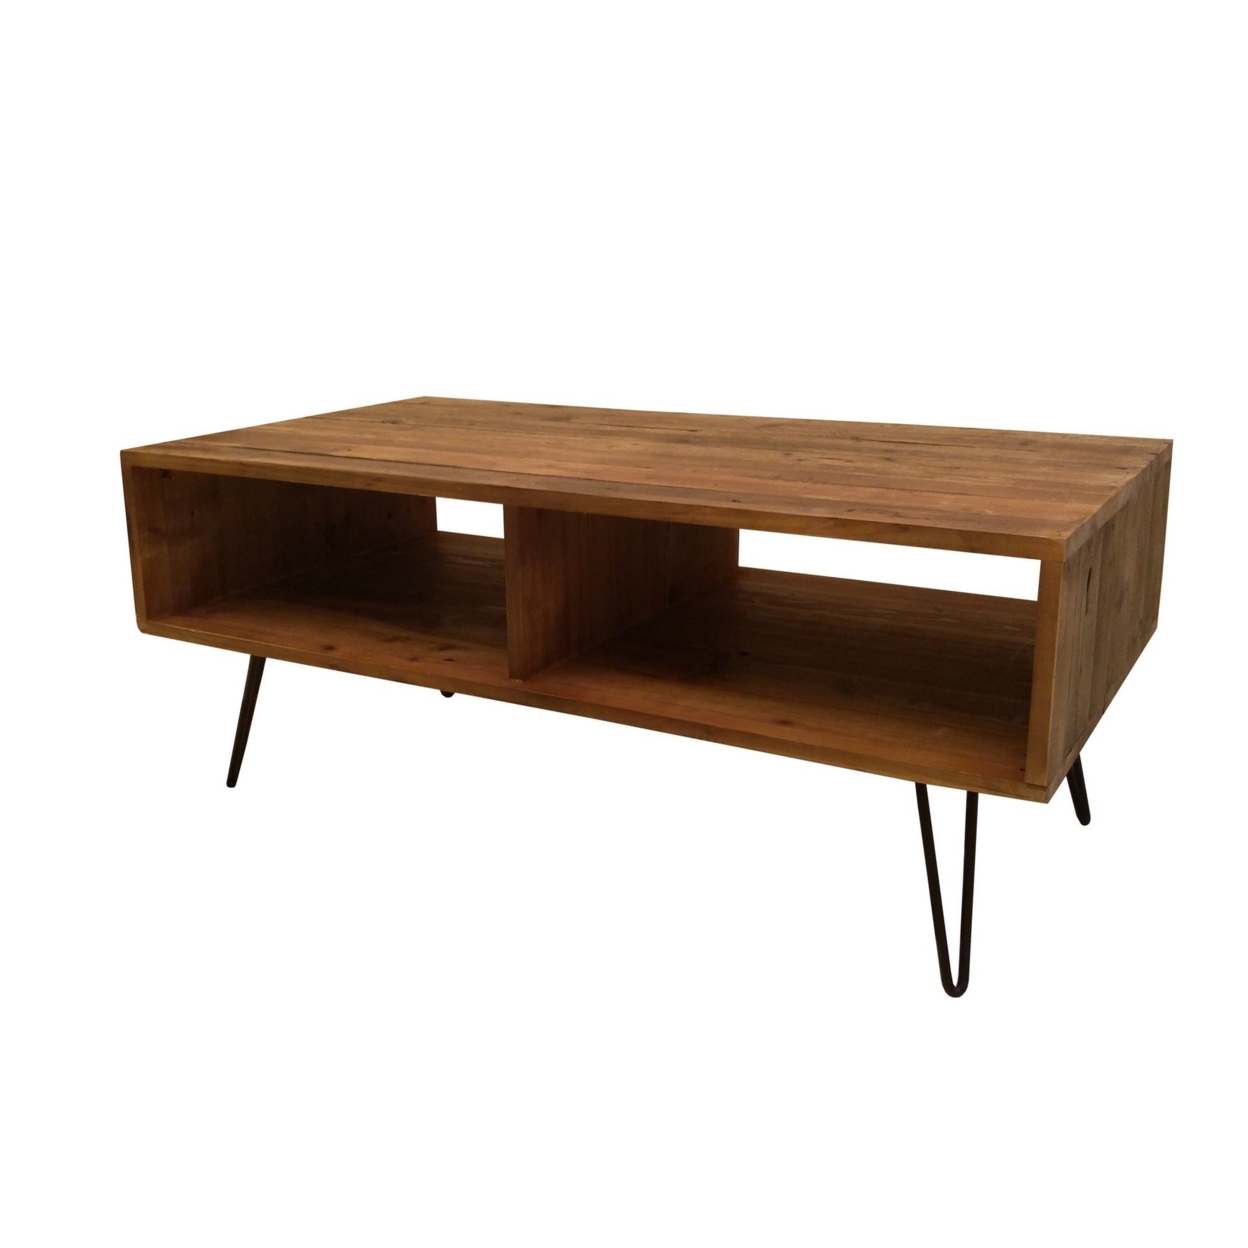 42 Inch Modern Cocktail Coffee Table With Open Compartments, Brown Wood Top - Saltoro Sherpi